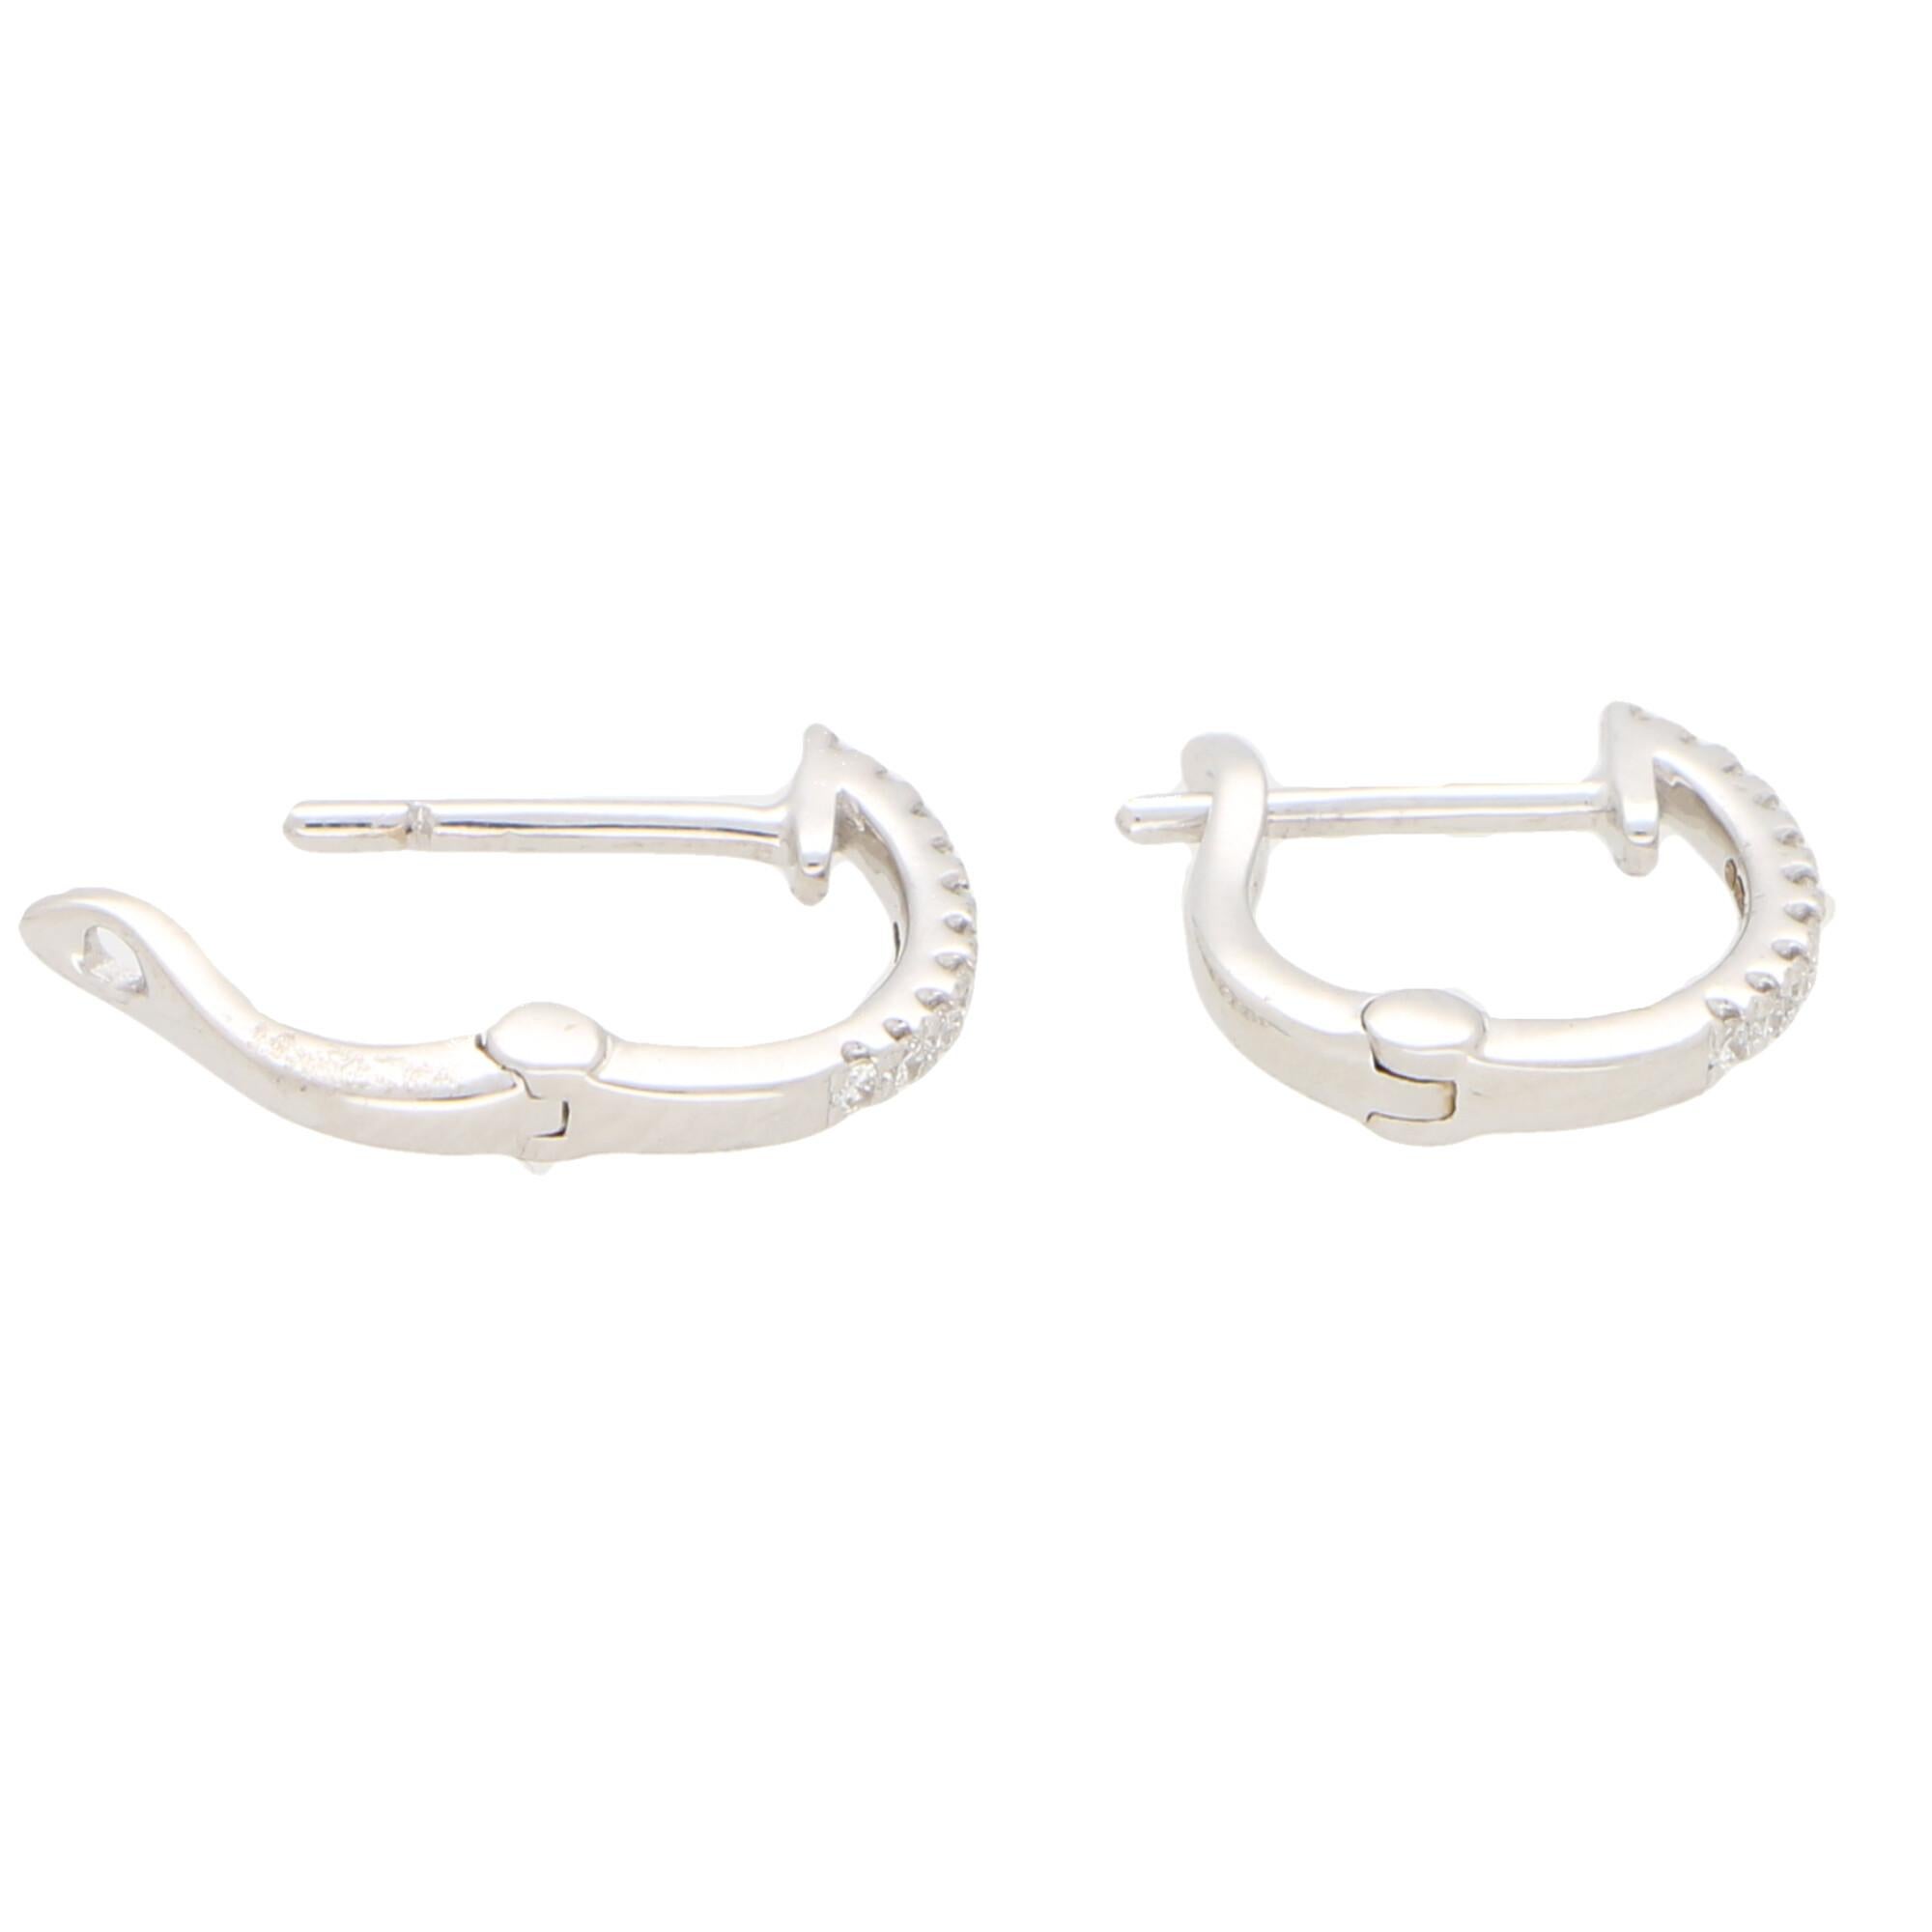 Diamond Hoop Earrings Set in 18k White Gold In Excellent Condition For Sale In London, GB